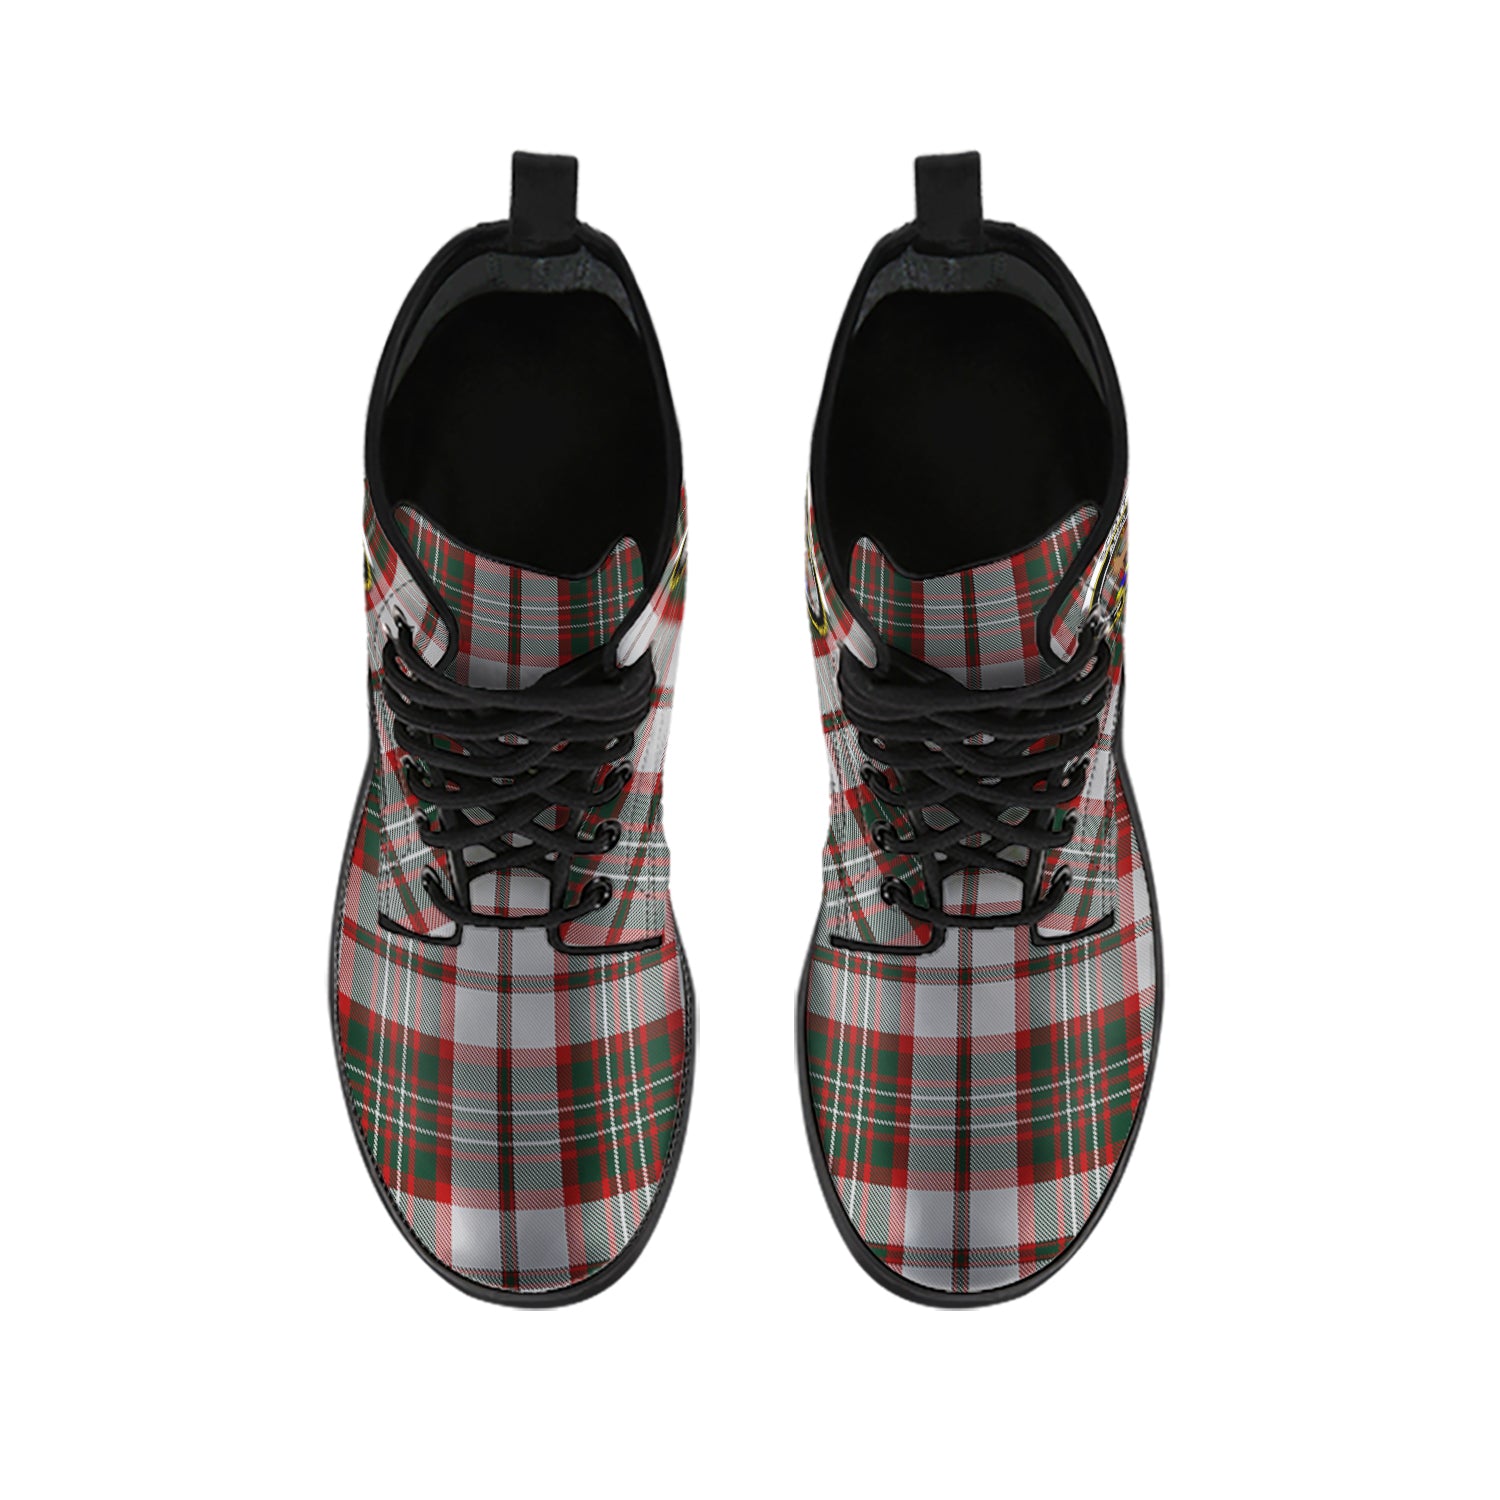 scott-dress-tartan-leather-boots-with-family-crest